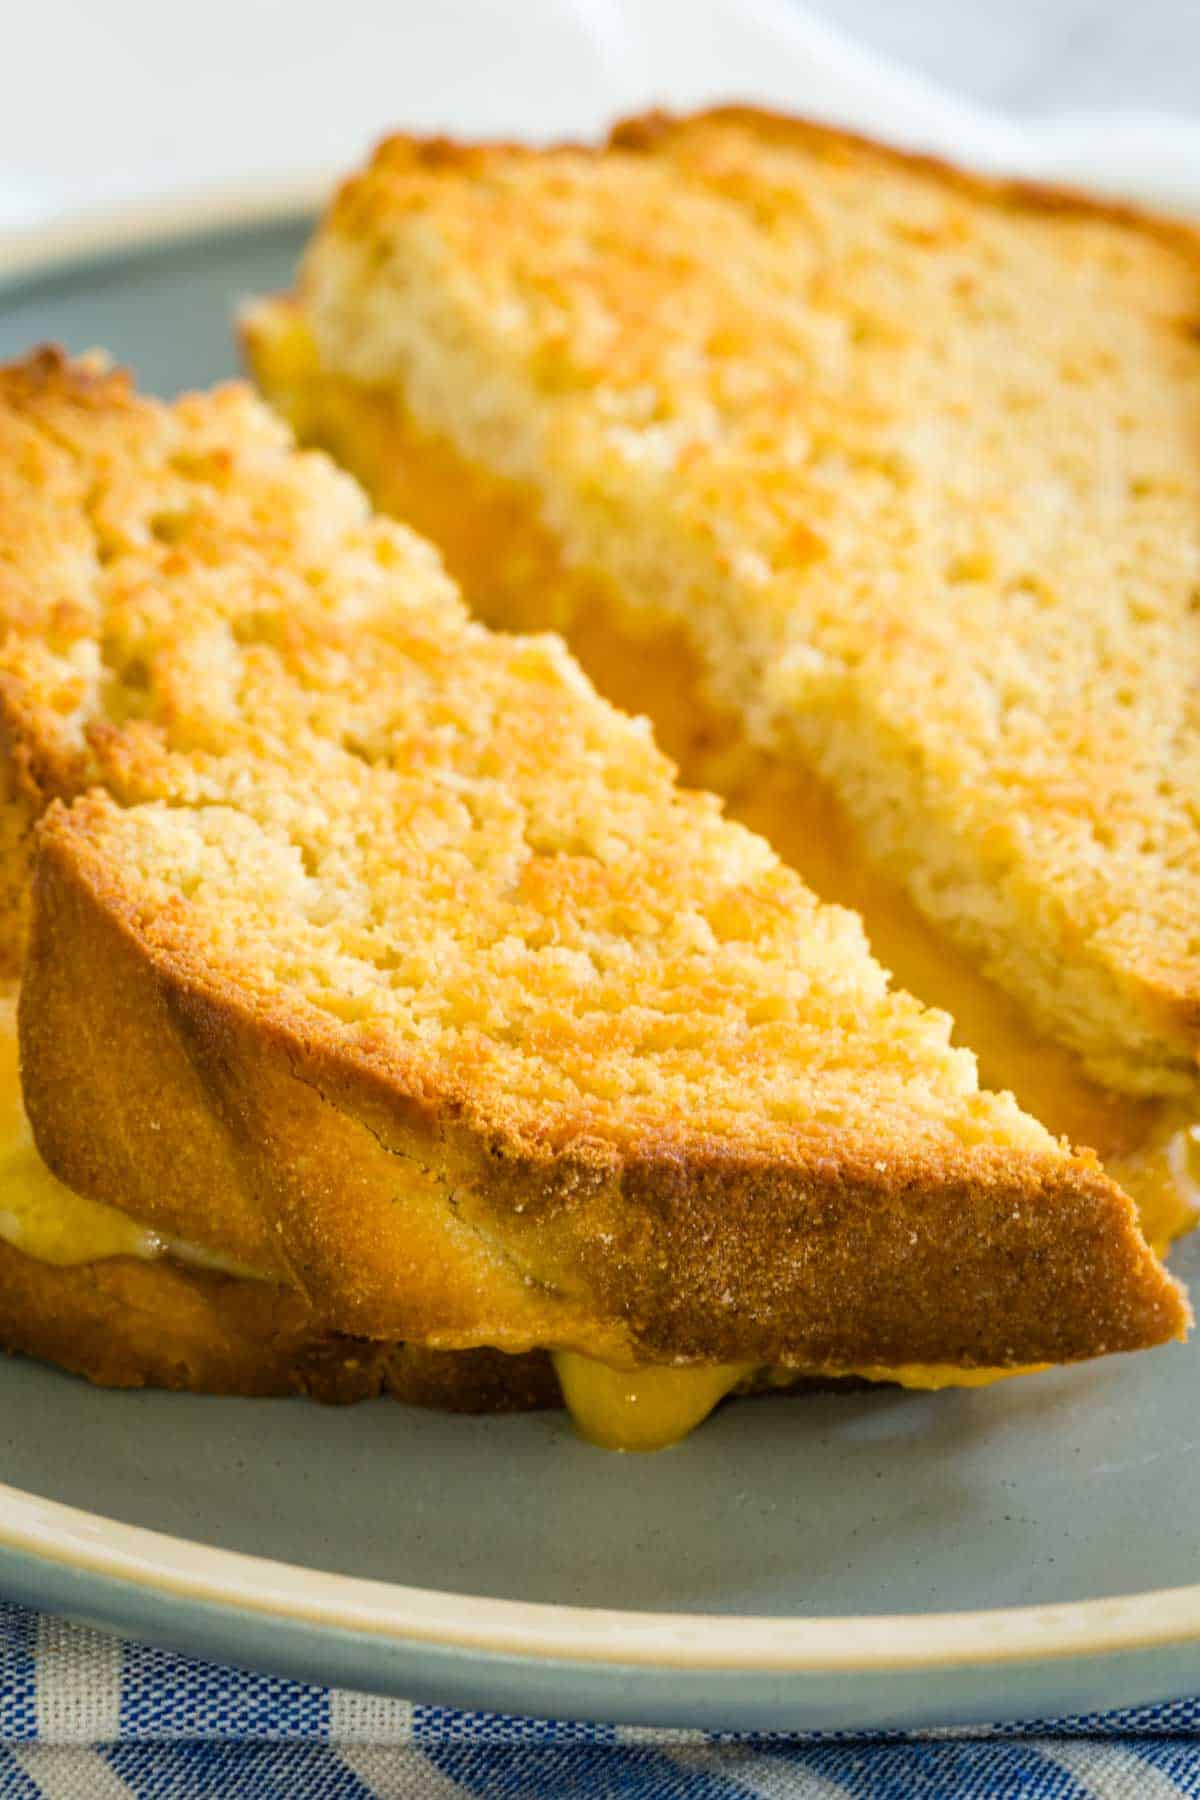 A gluten-free grilled cheese sandwich on a plate.